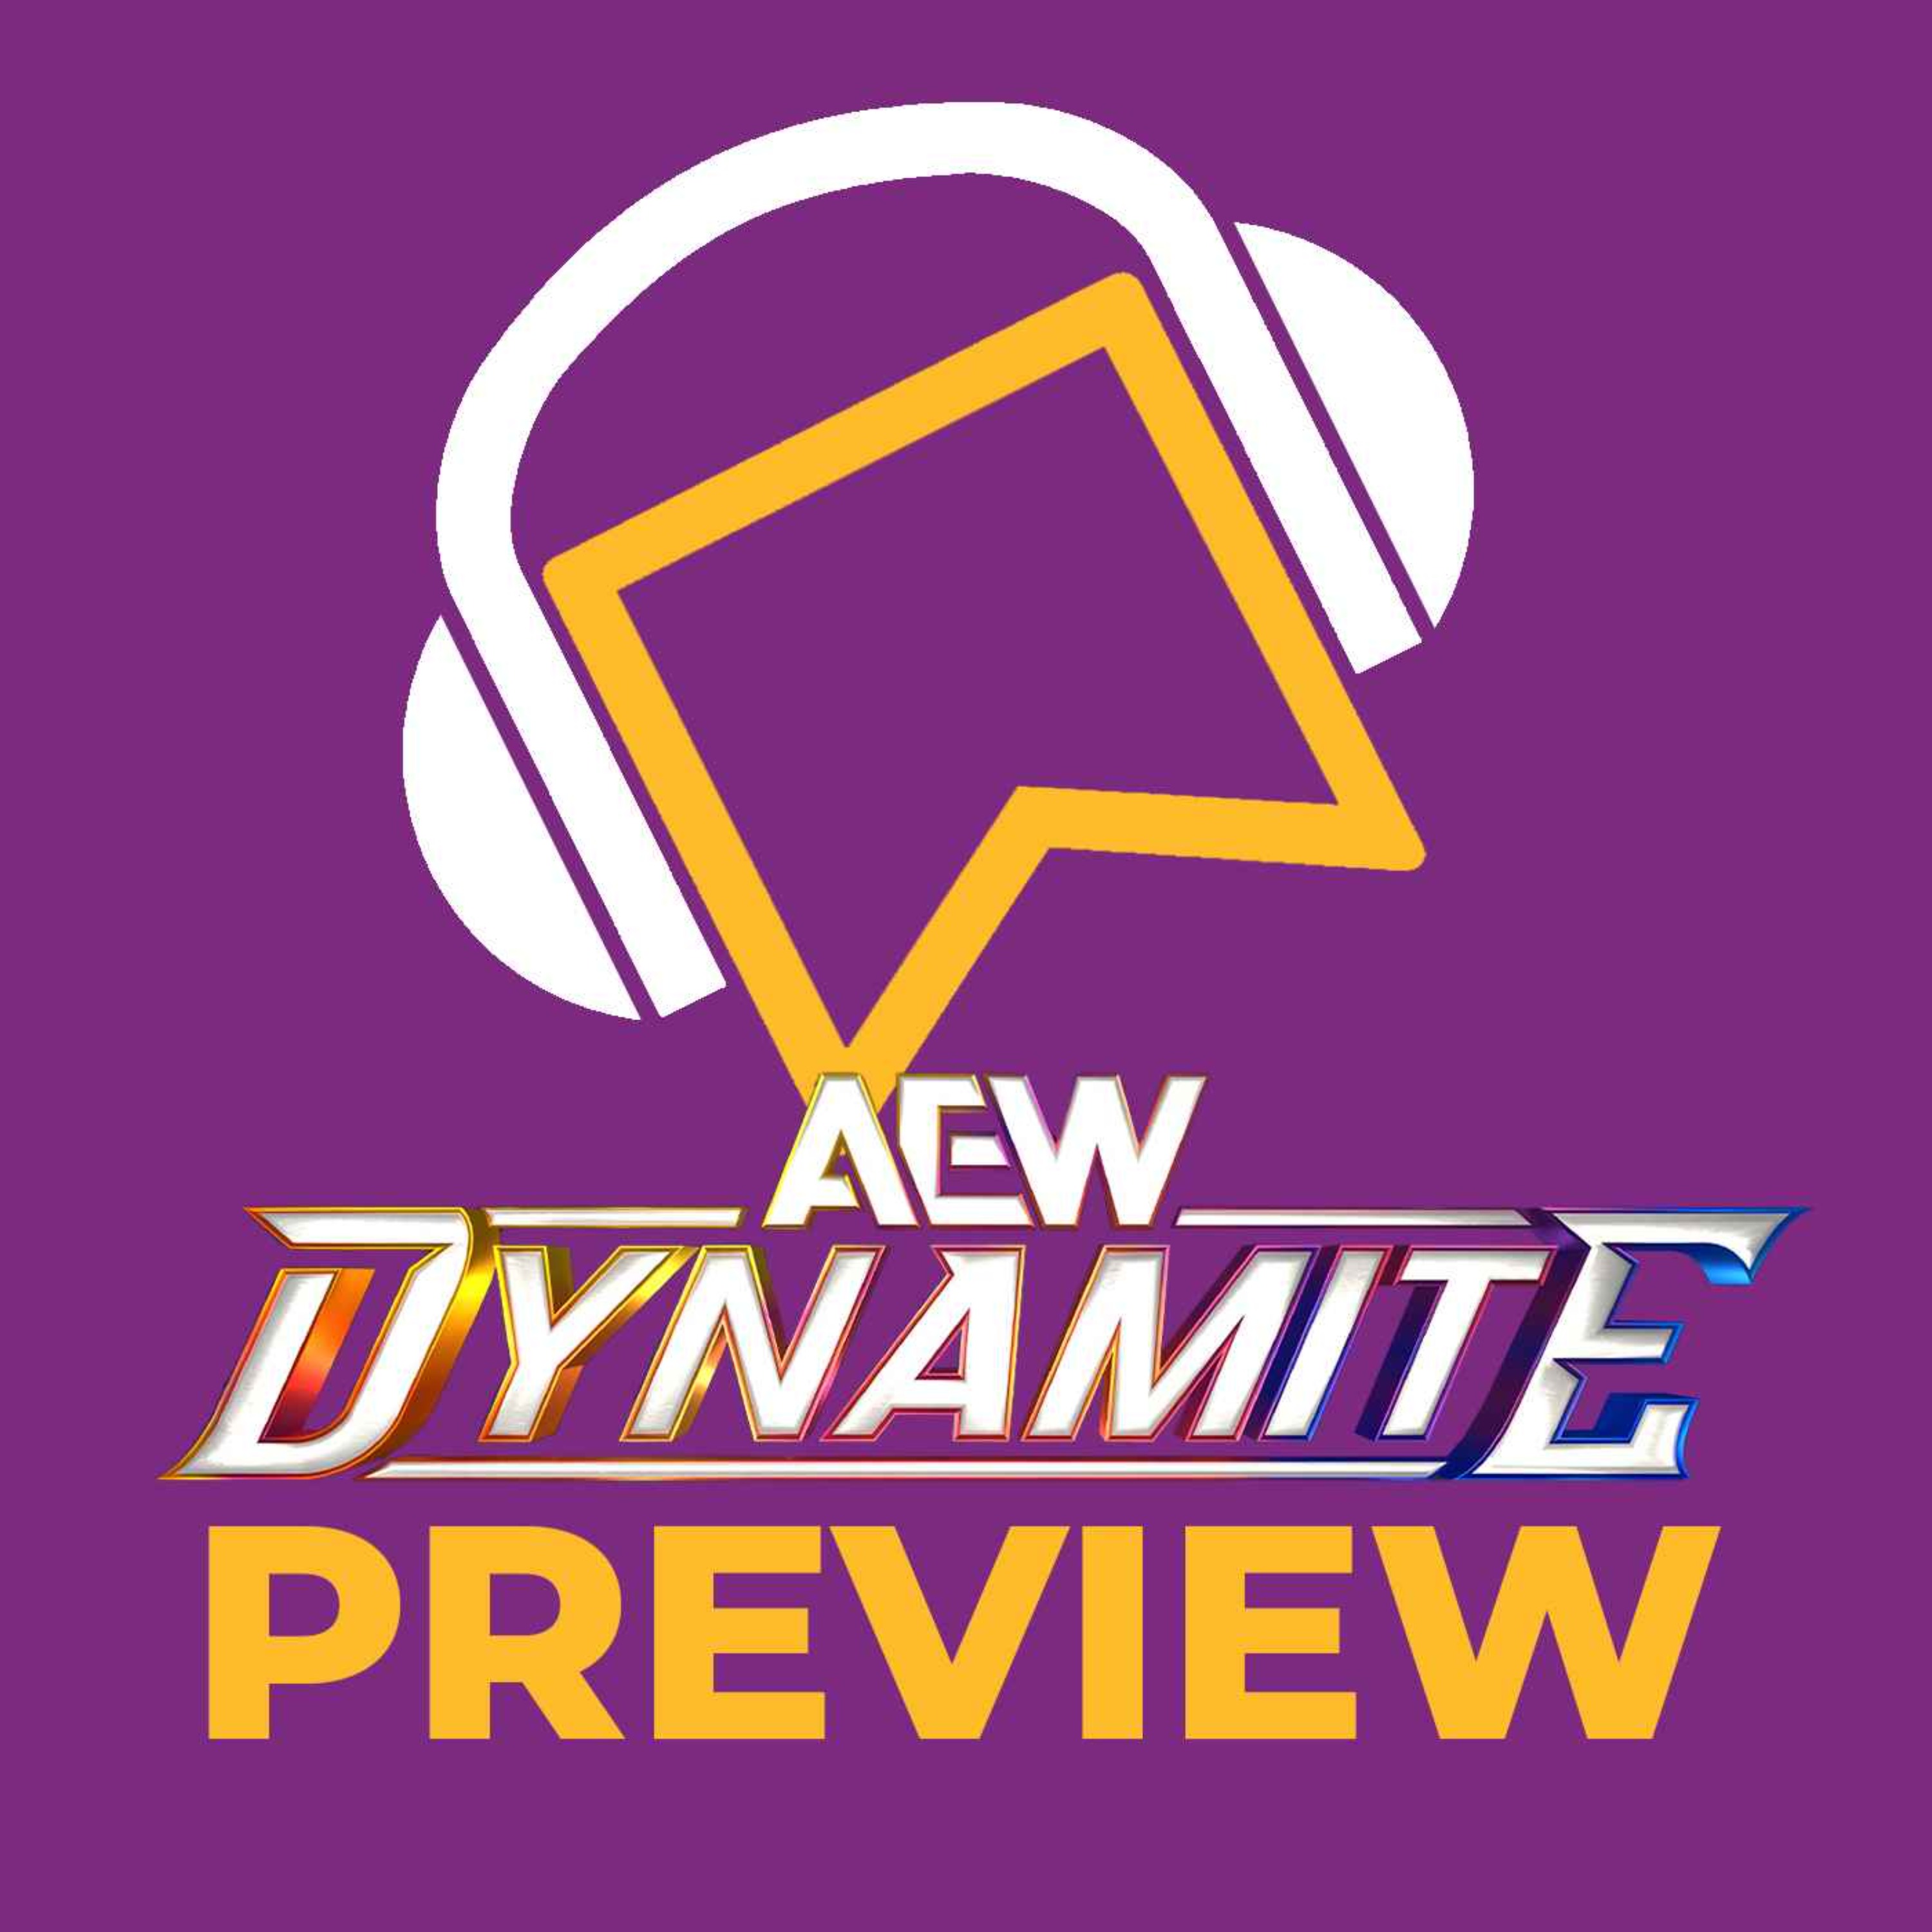 AEW Dynamite Preview - Double Or Nothing Go-Home Show! Swerve Strickland Vs. Nick Wayne! Will Ospreay Teams With Orange Cassidy! Bryan Danielson's Birthday Treat?!